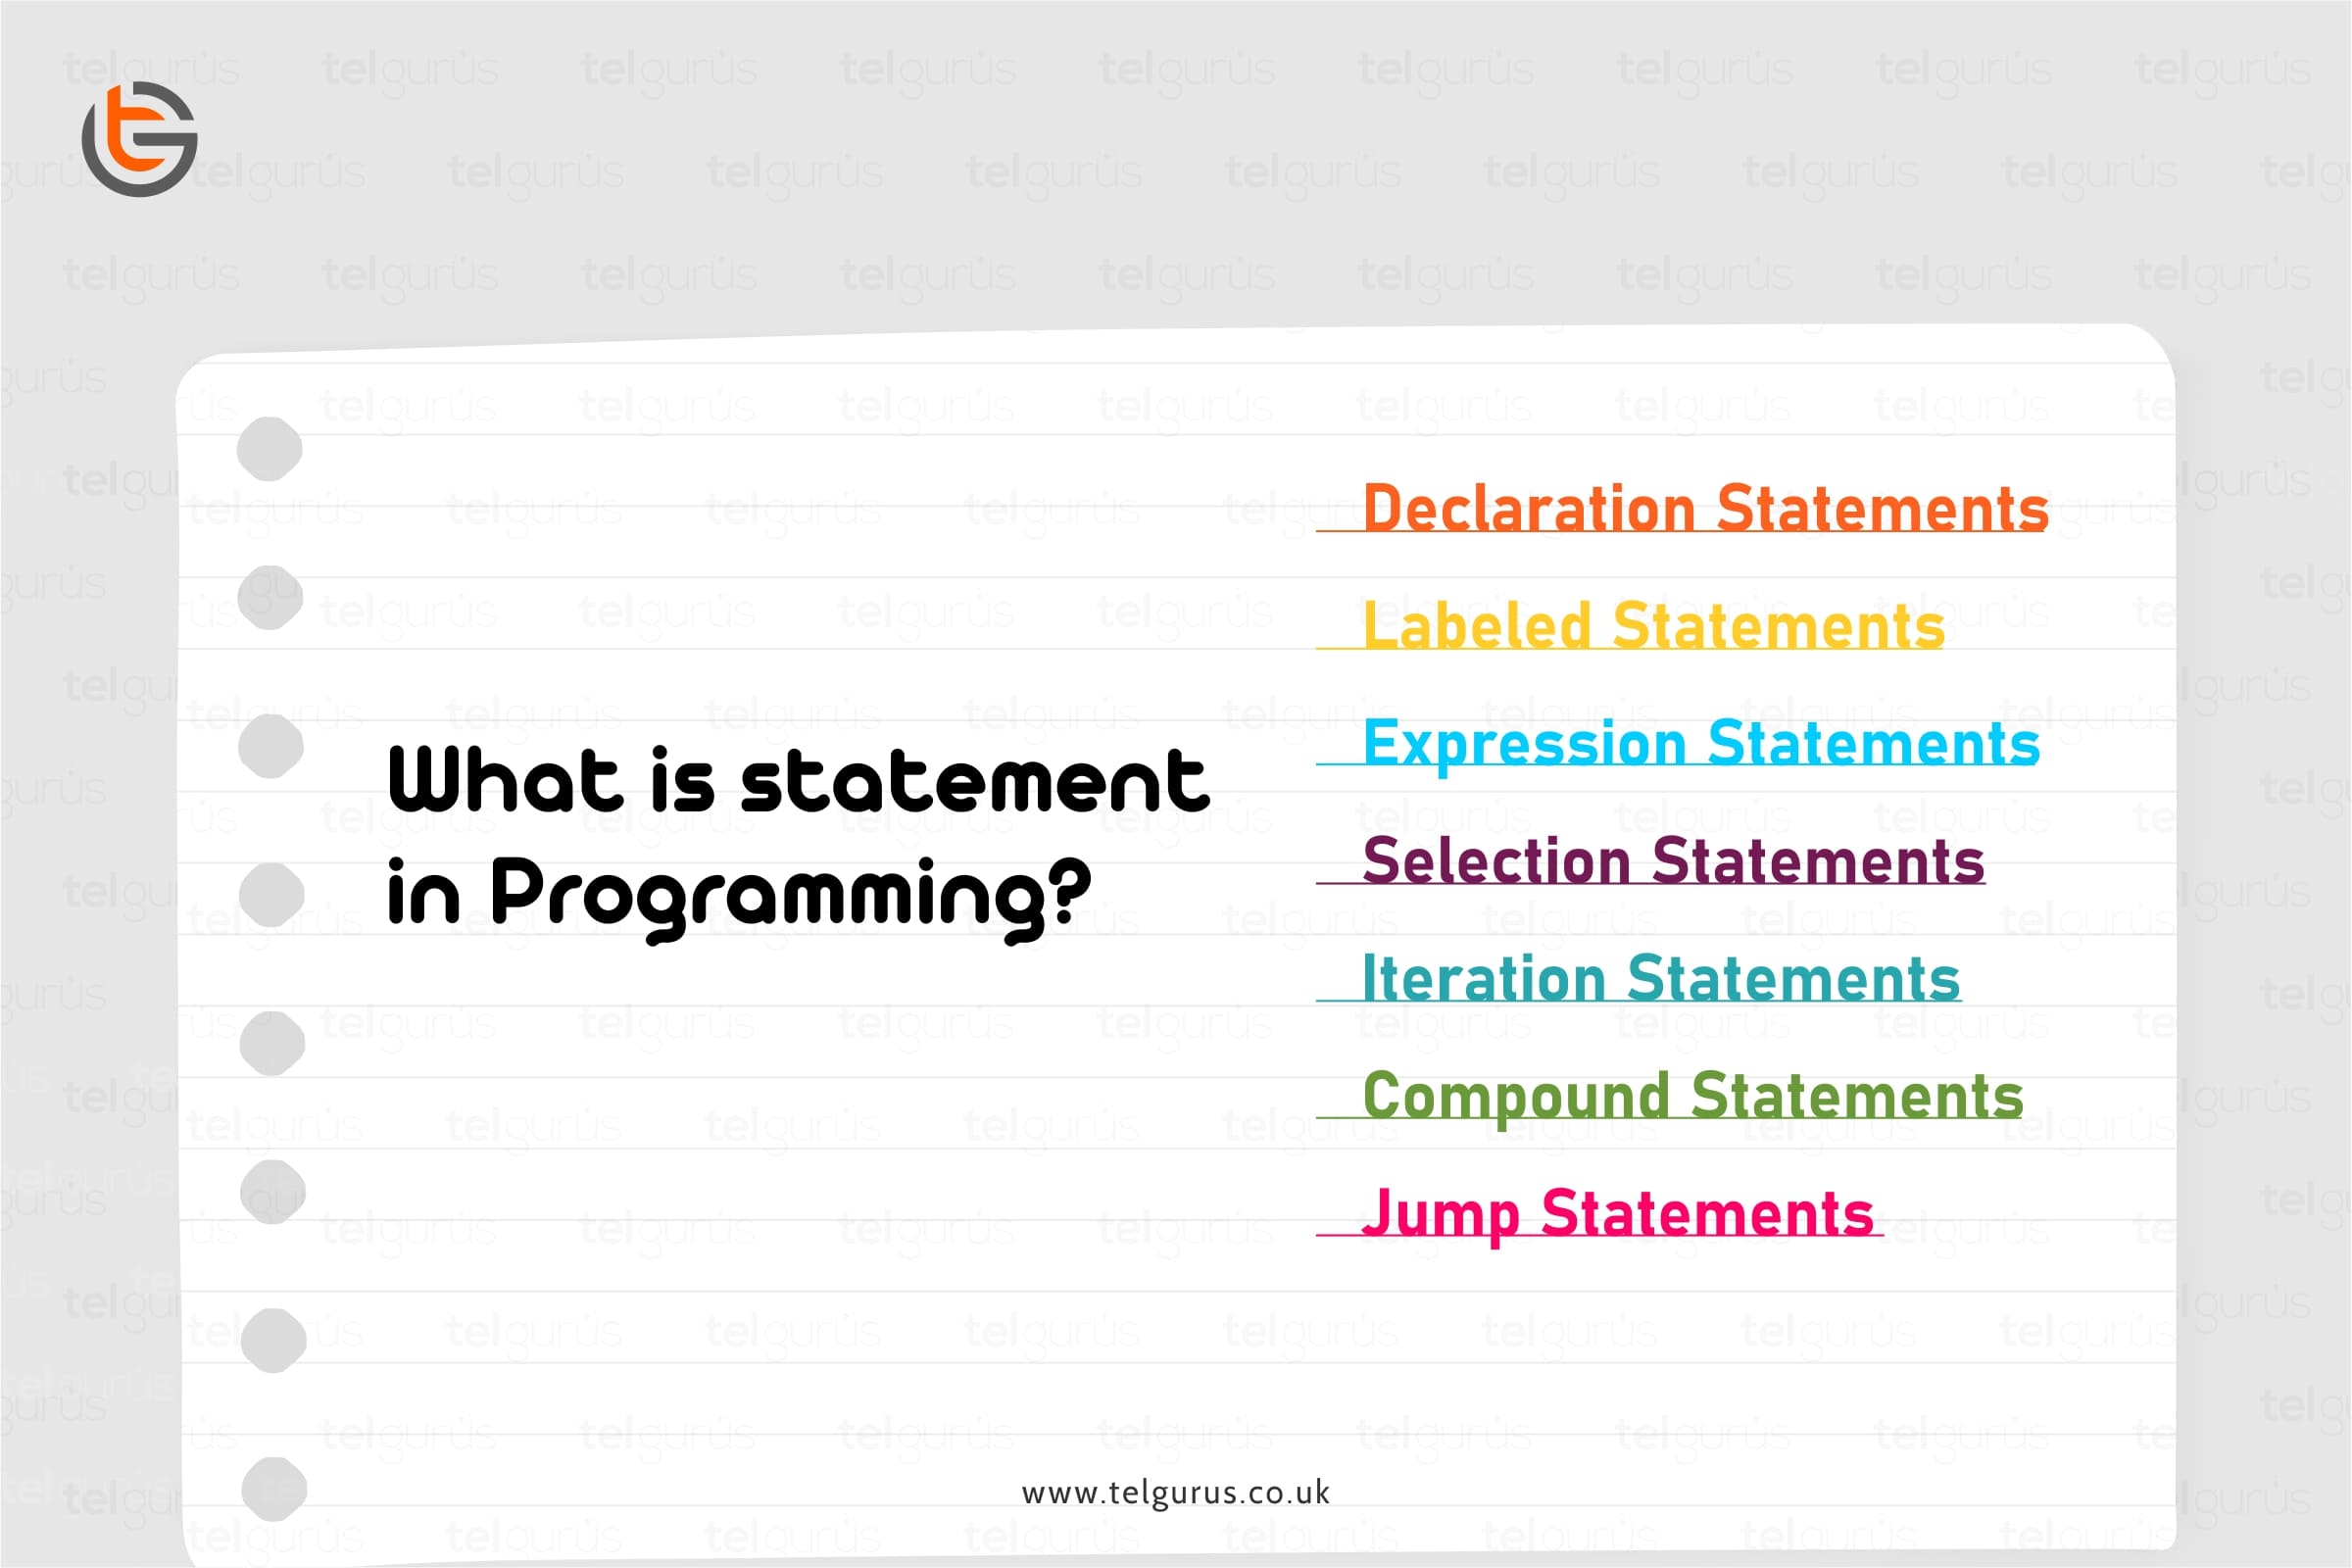 What is statement in Programming?